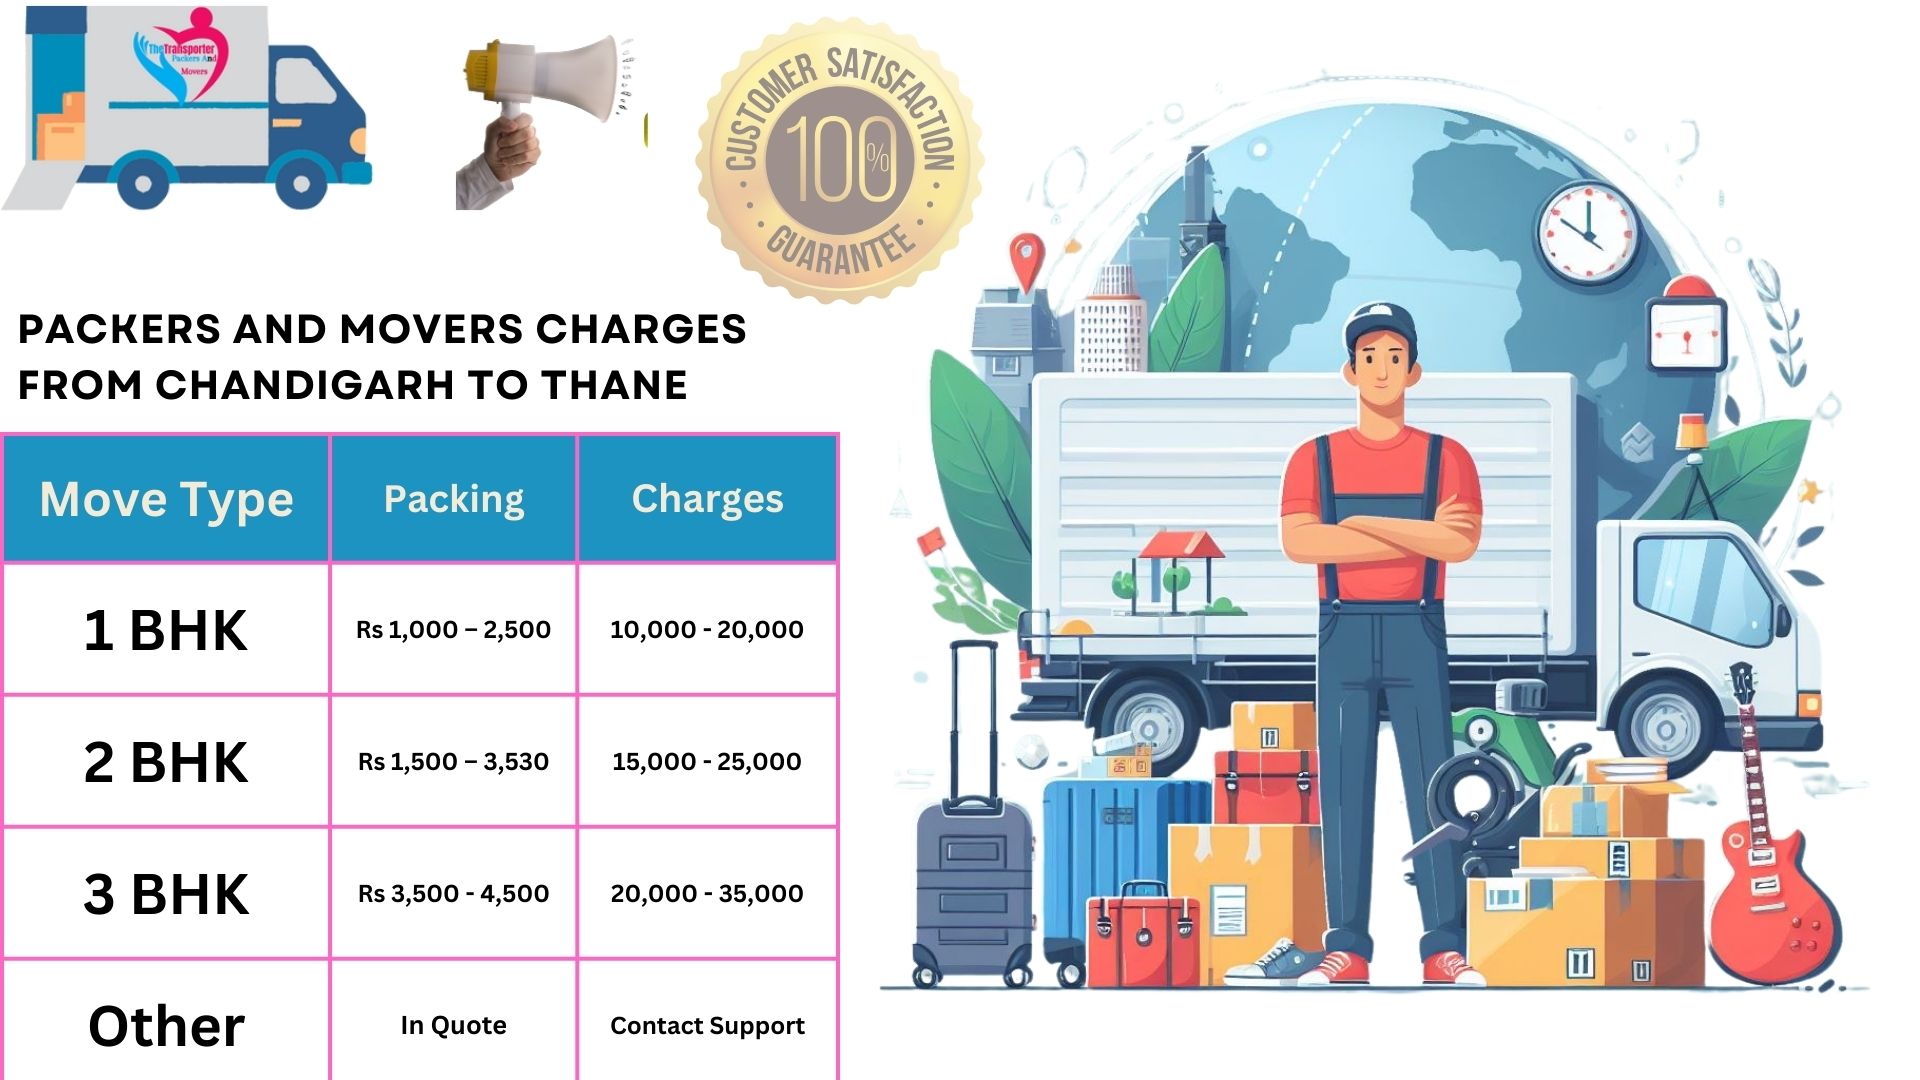 Packers and Movers charges list From Chandigarh to Thane